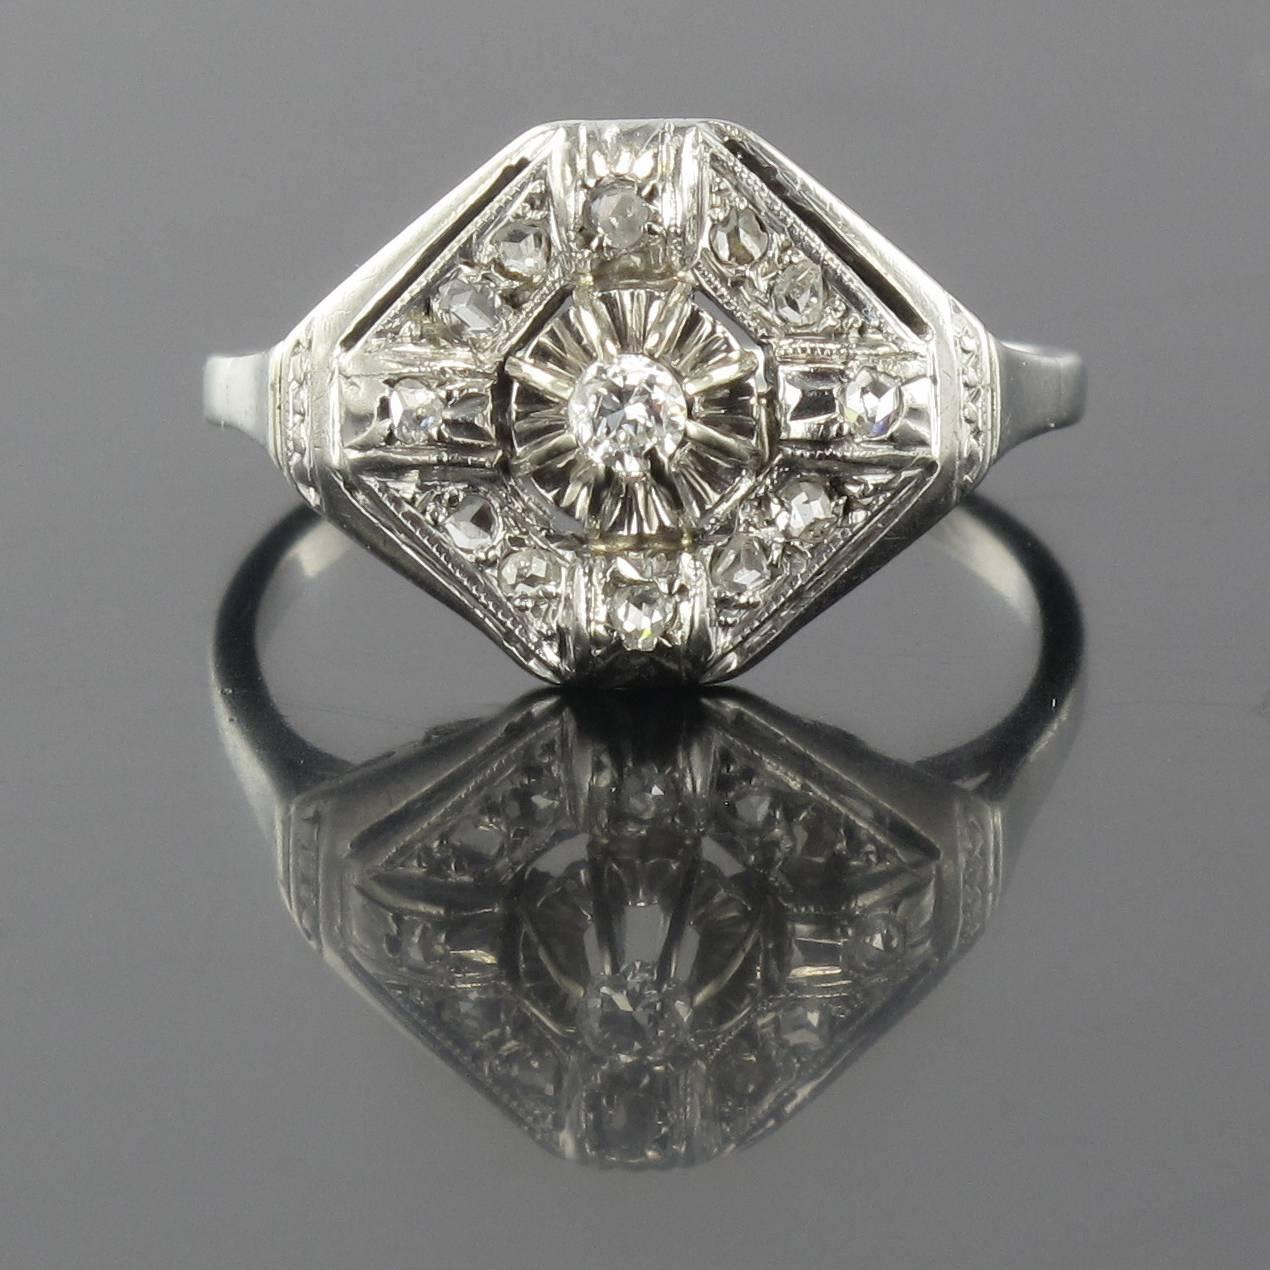 Ring in platinium and 18 carat white gold, dog and eagle heads hallmarks. 

This exquisite antique ring is claw set with a medium sized brilliant cut round diamond in an openwork lozenge shaped design set with small rose cut diamonds. The mount of